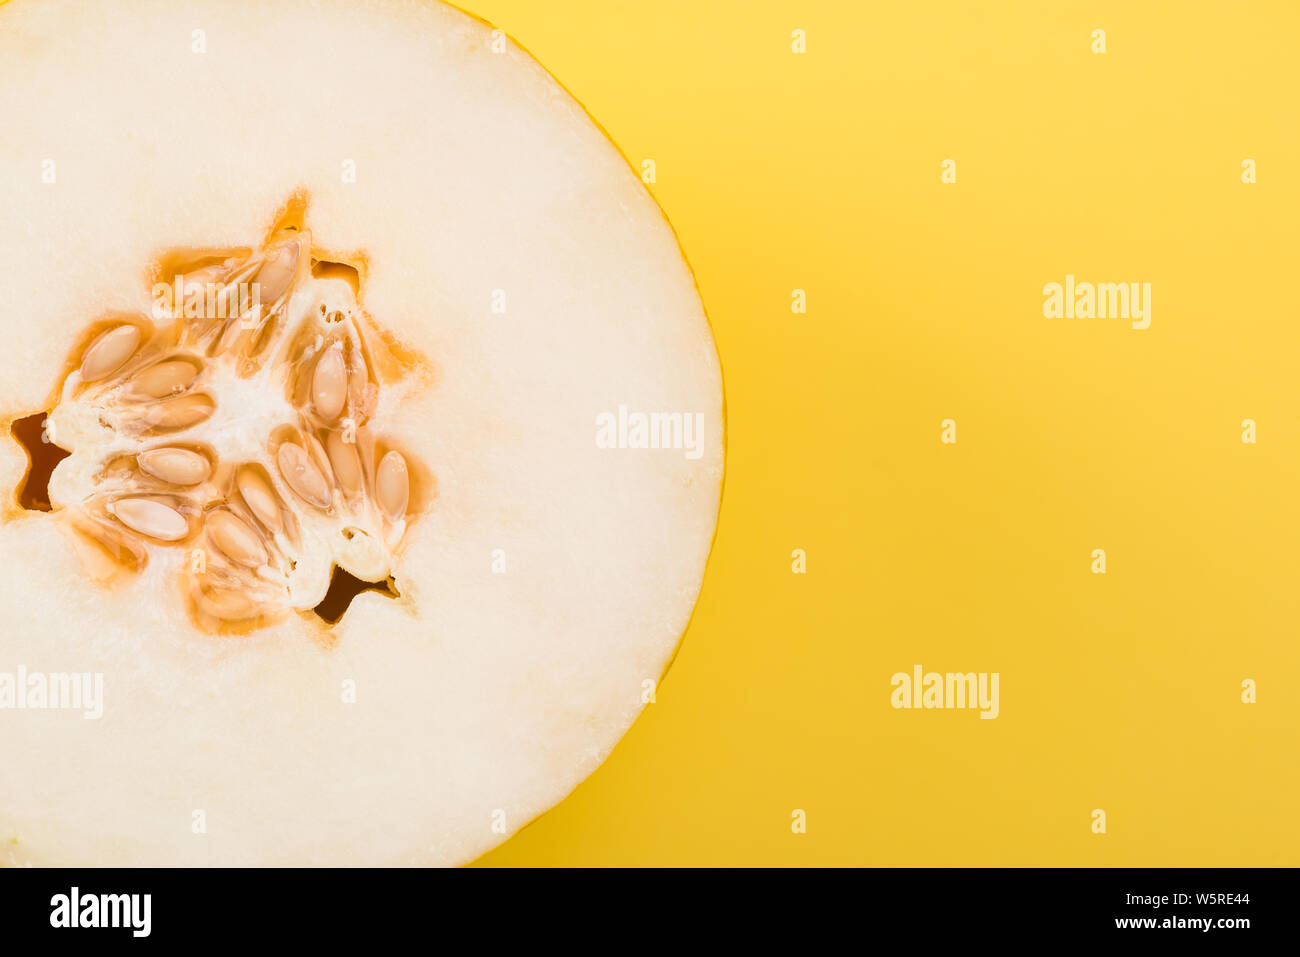 Yellow Musk Melon Sliced in Half on Pastel Background, Top View. Stock Photo